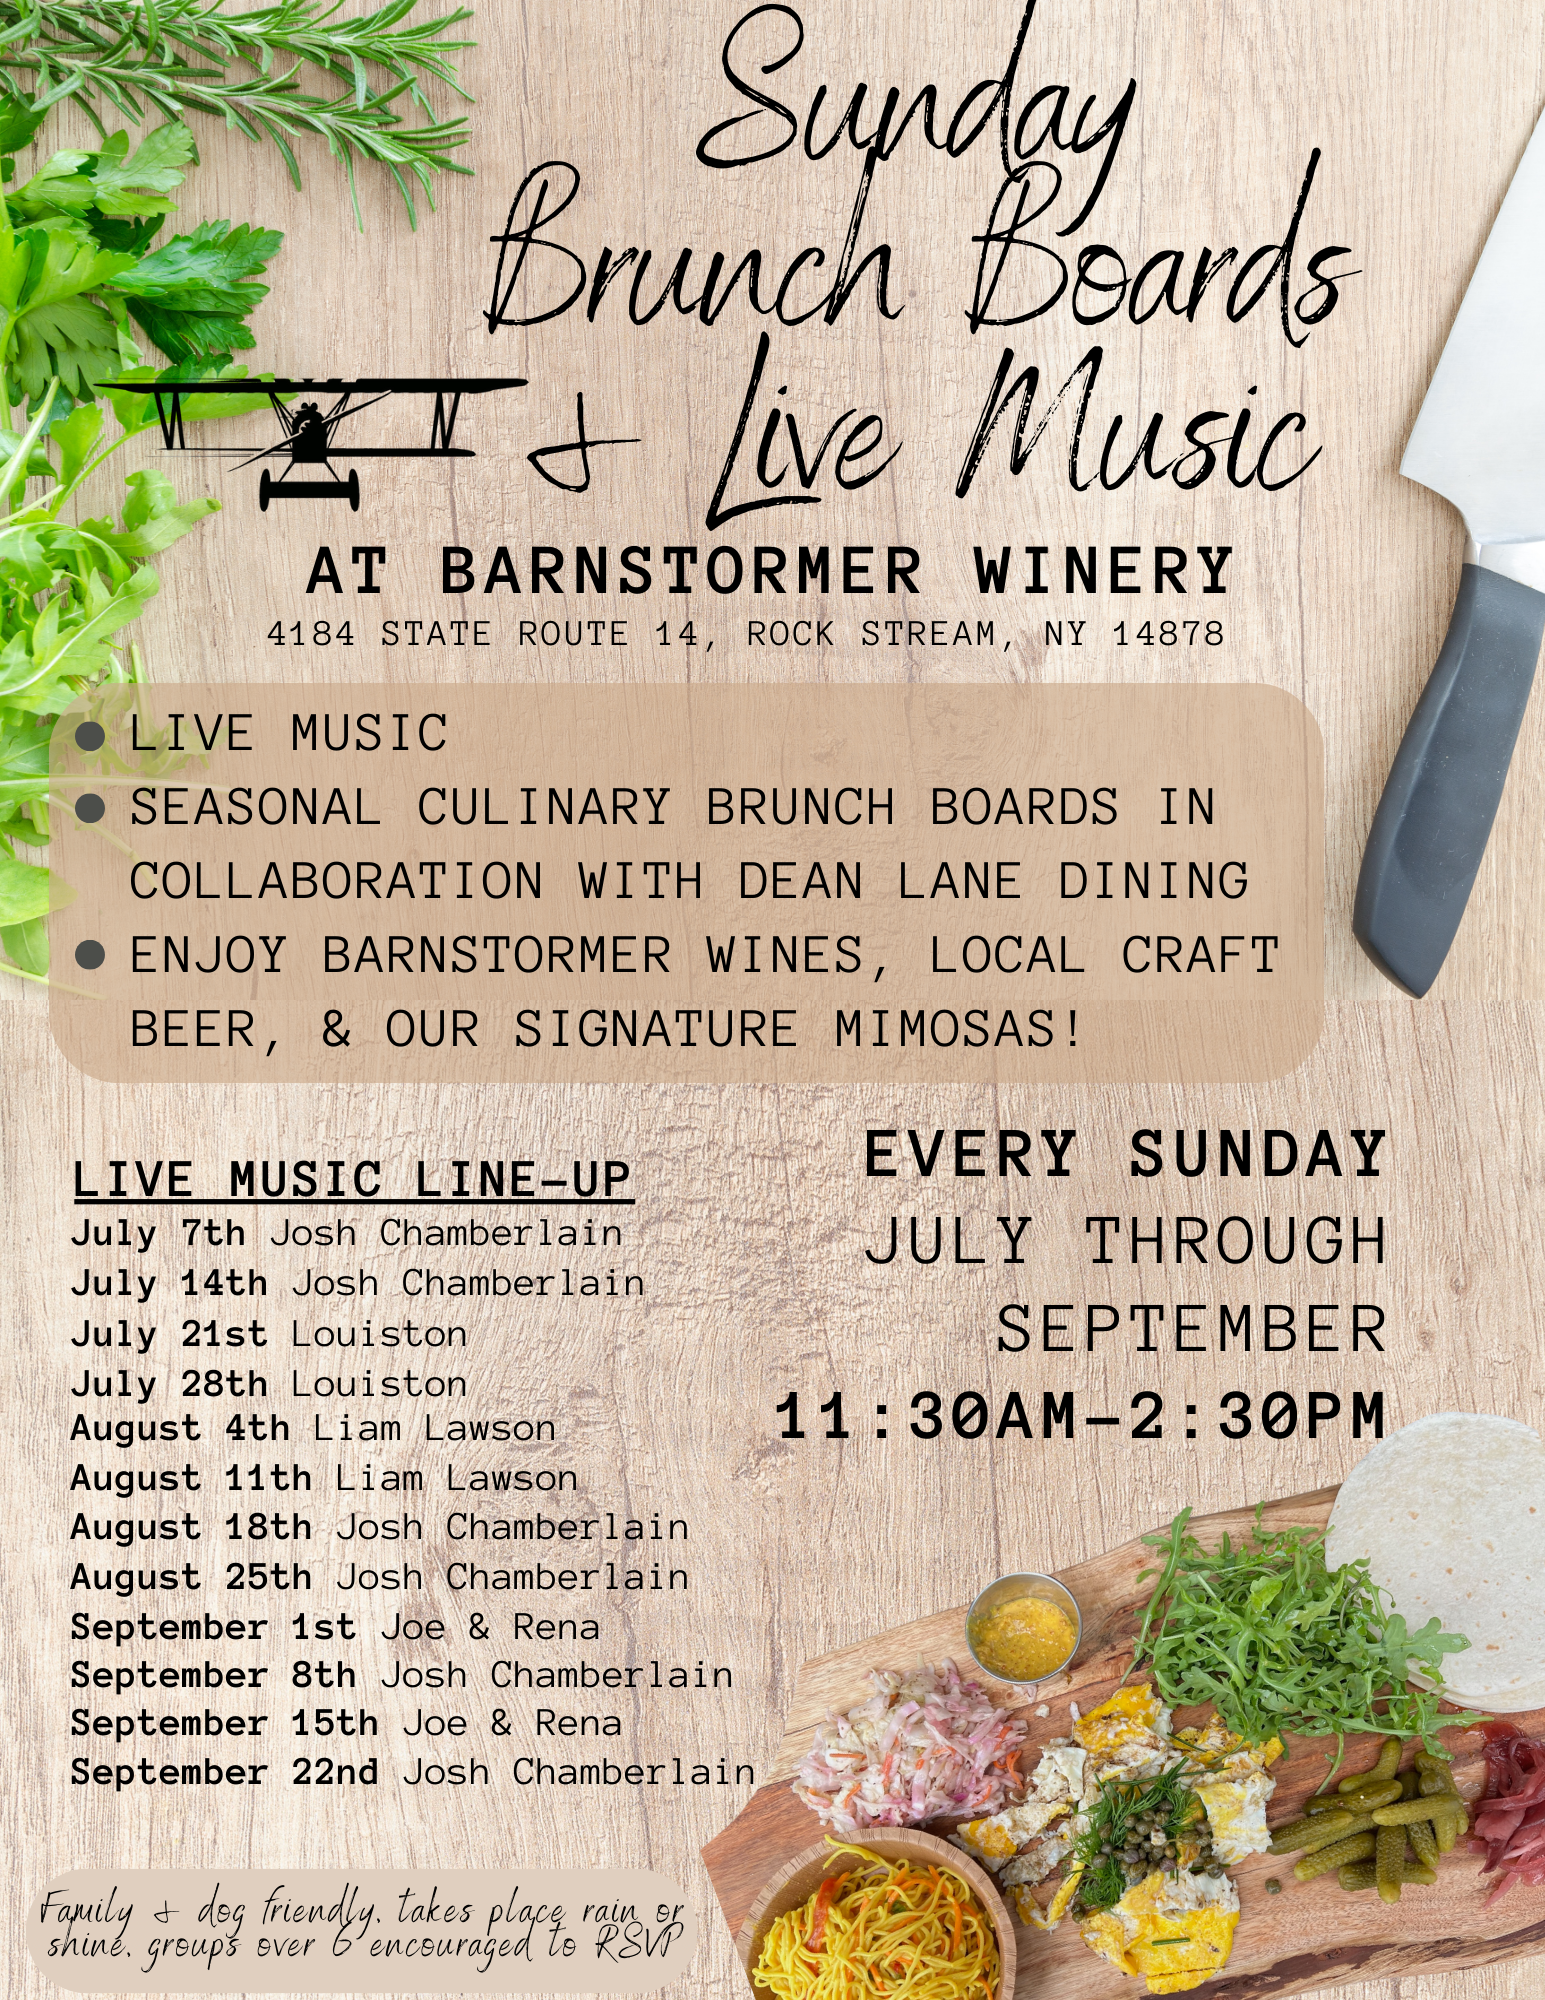 Sunday Brunch series & live music. Seasonally sourced ingredients for our brunch boards in collaboration with Dean Lane Dining, featuring live music. Every Sunday July through September 2024!